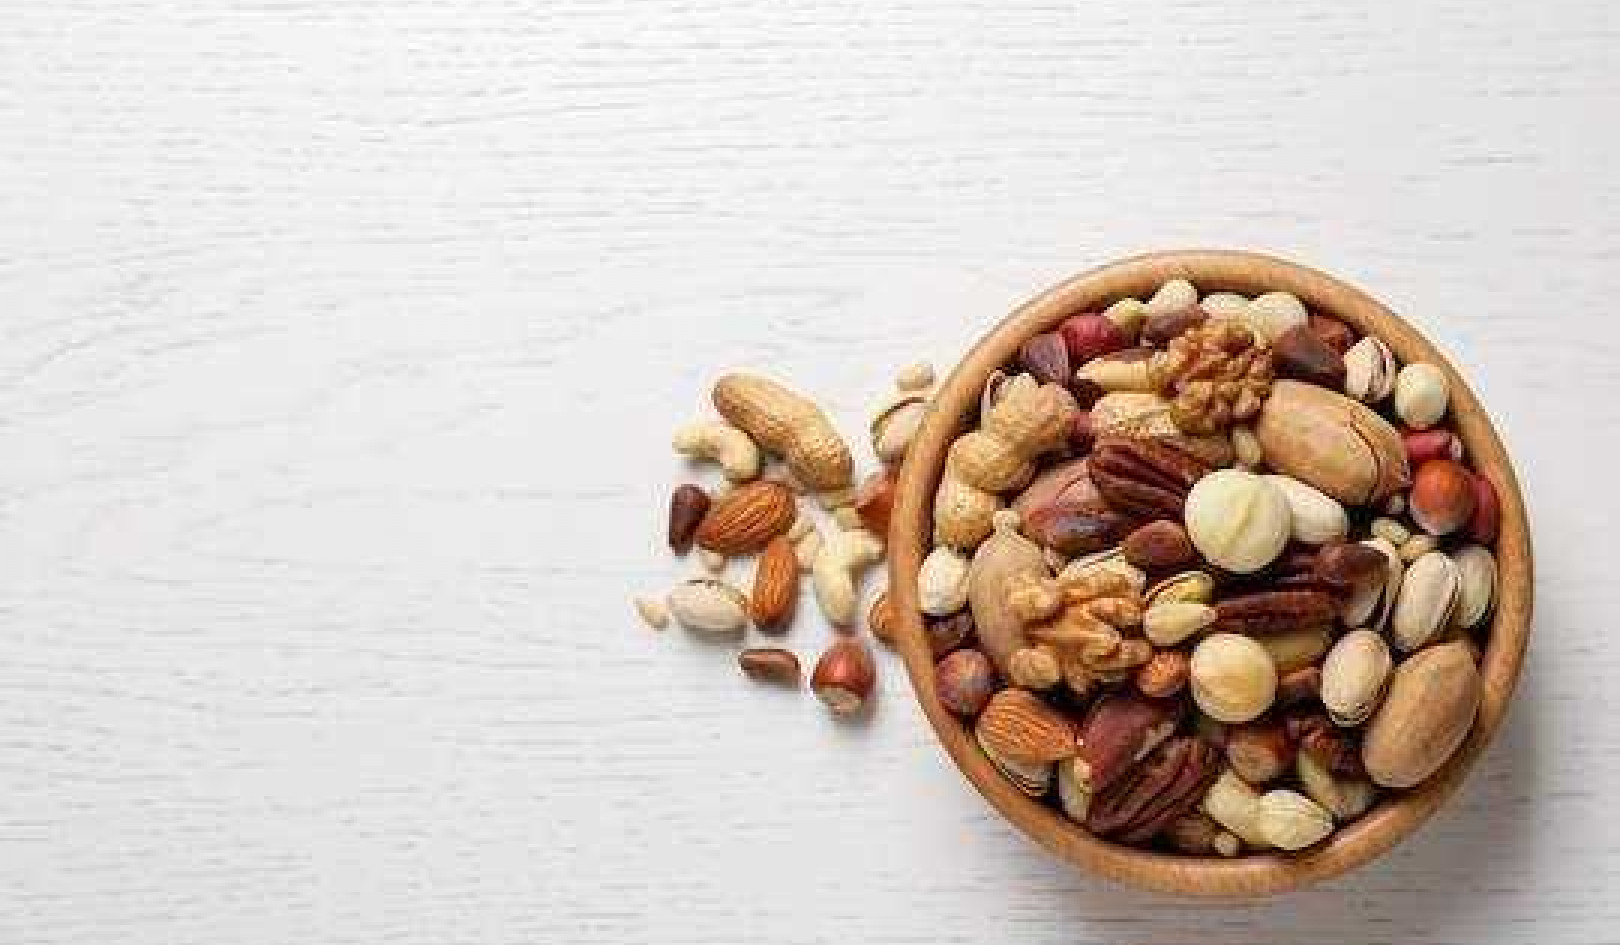 Does Eating Two Teaspoons Of Nuts Really Boost Your Brain Function?